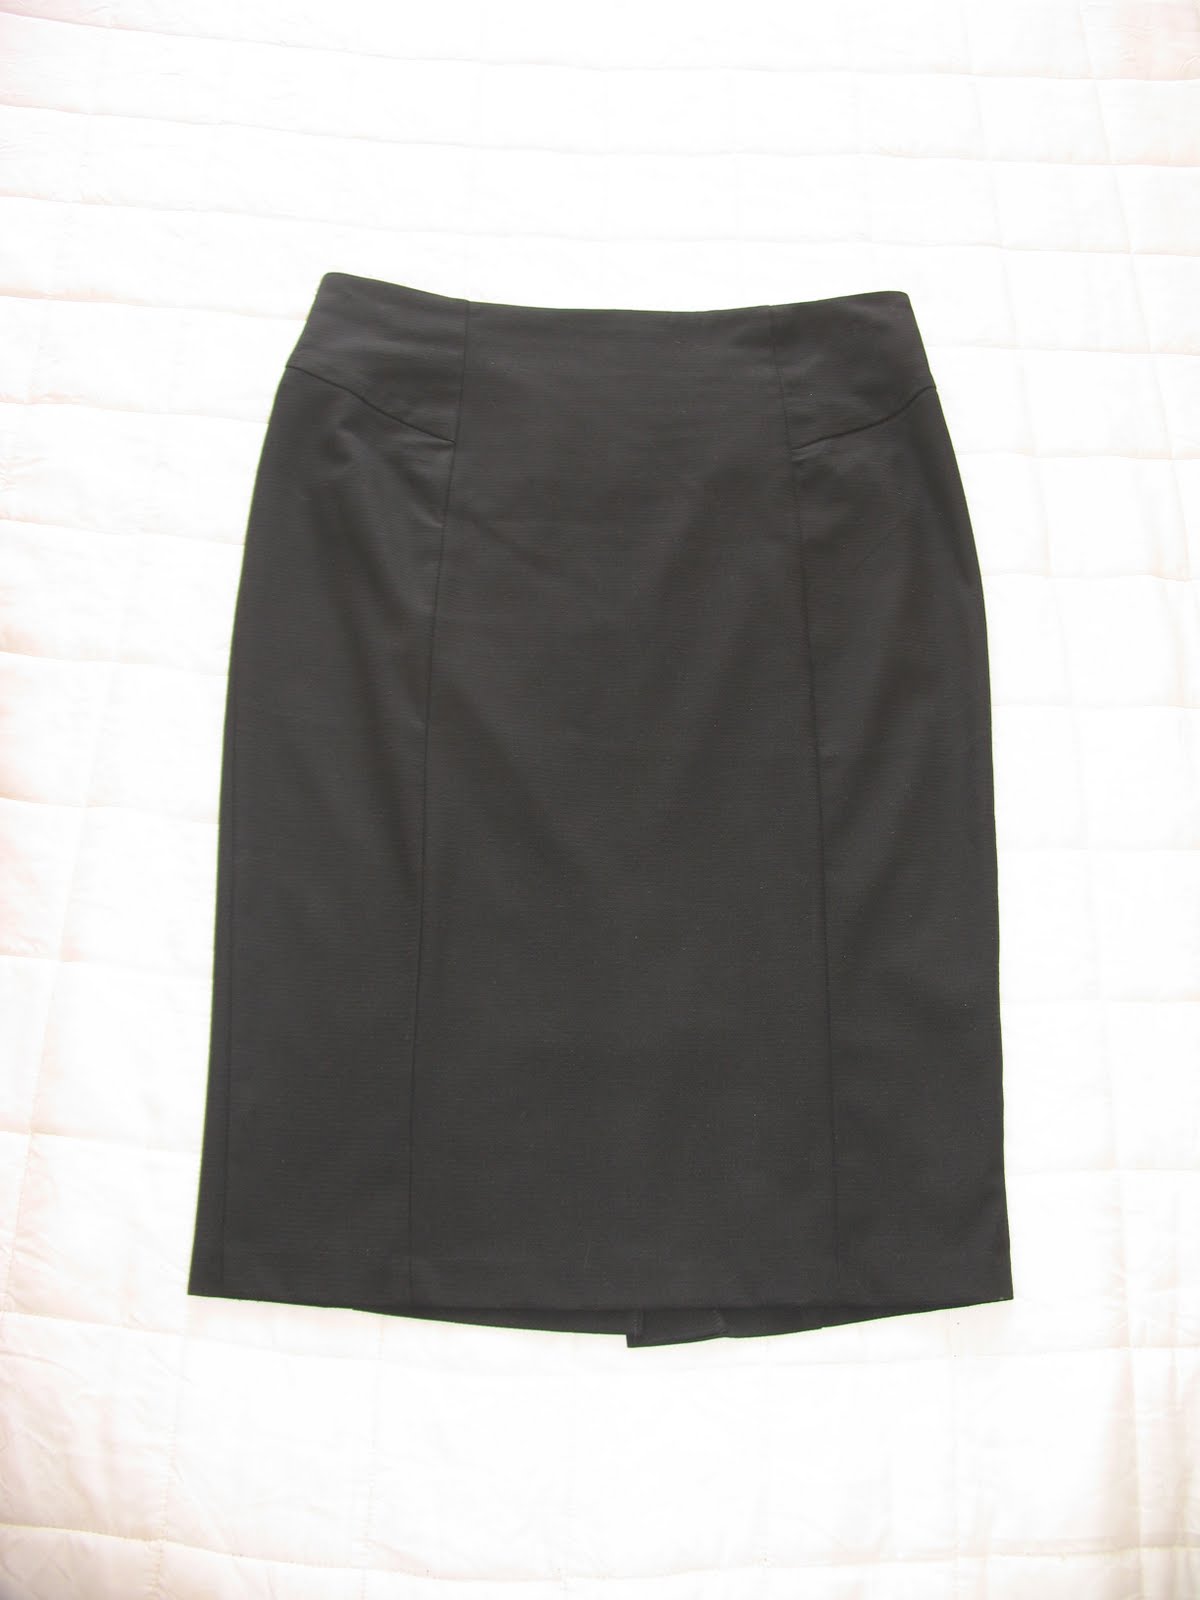 Outfits Anonymous: ASOS Black Pencil Skirt